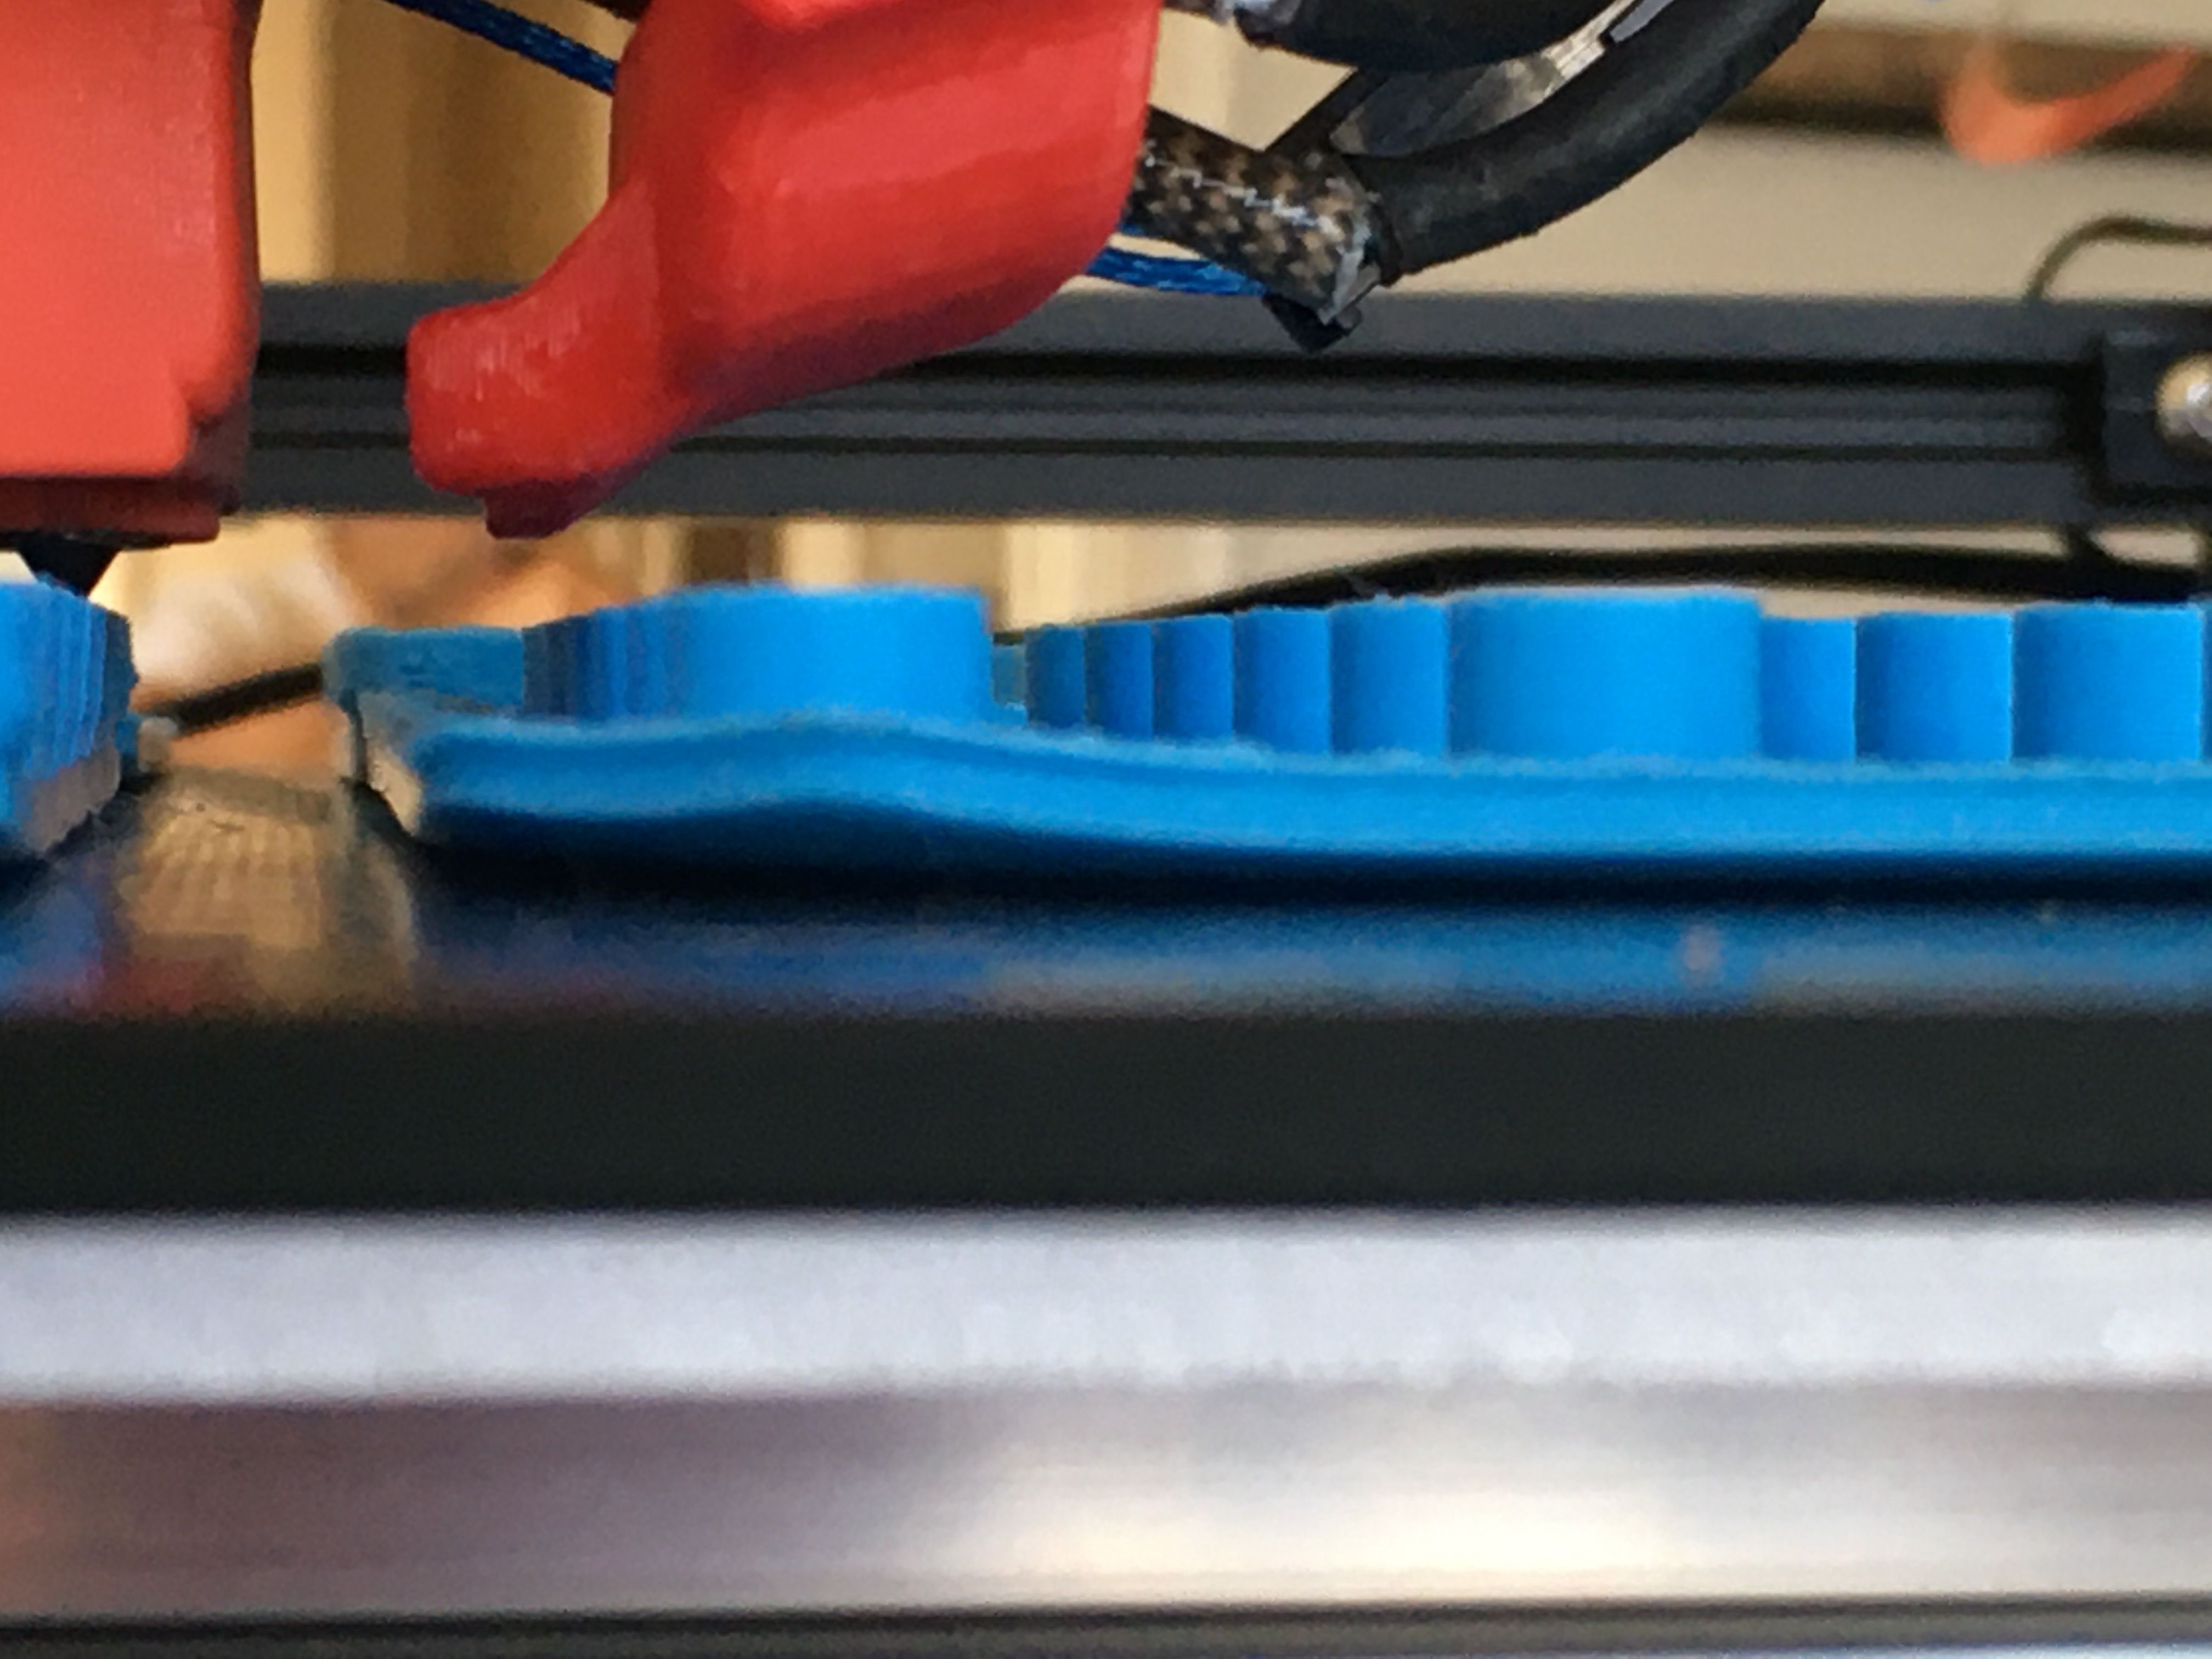 Ender 3 s1 pro broken thermistor wire? Explanation in comments : r